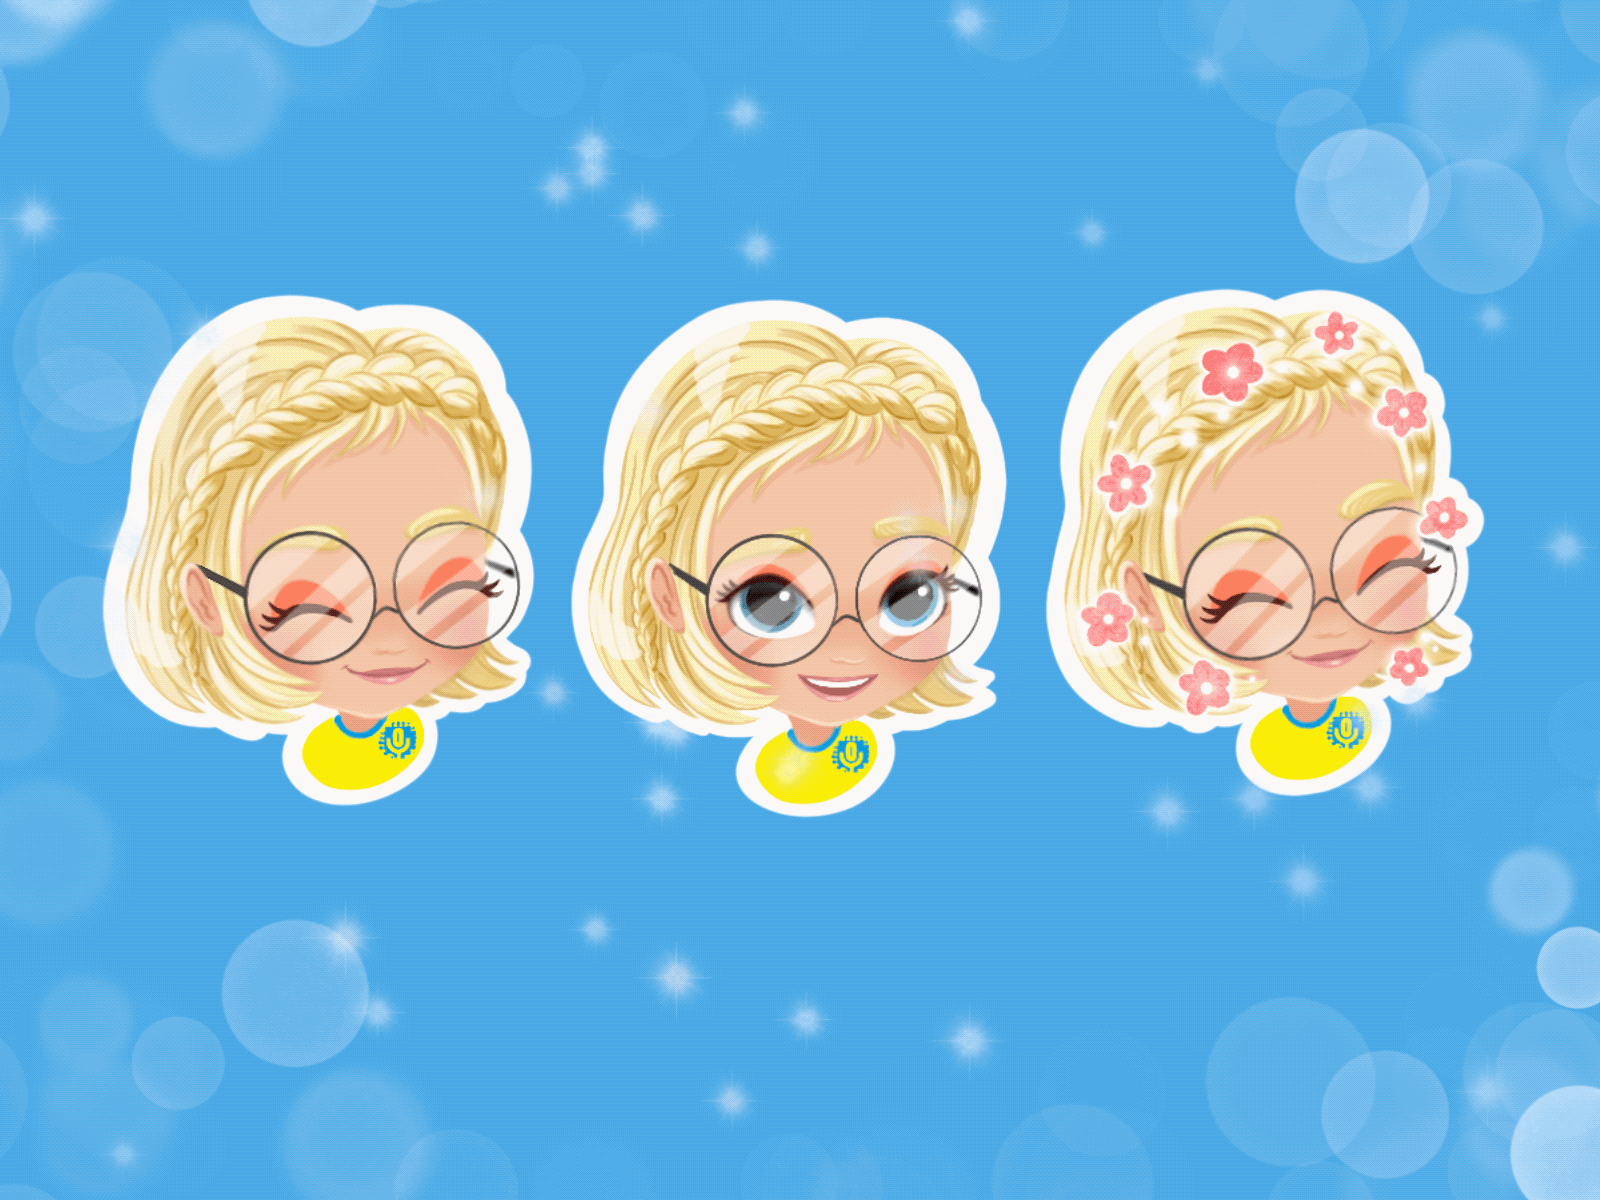 Girl with the braid stickers animation blond hair blue brand character character character design children character children illustration emoji gif girl glasses illustration illustrator kid kids illustration logo motion sticker sticker pack